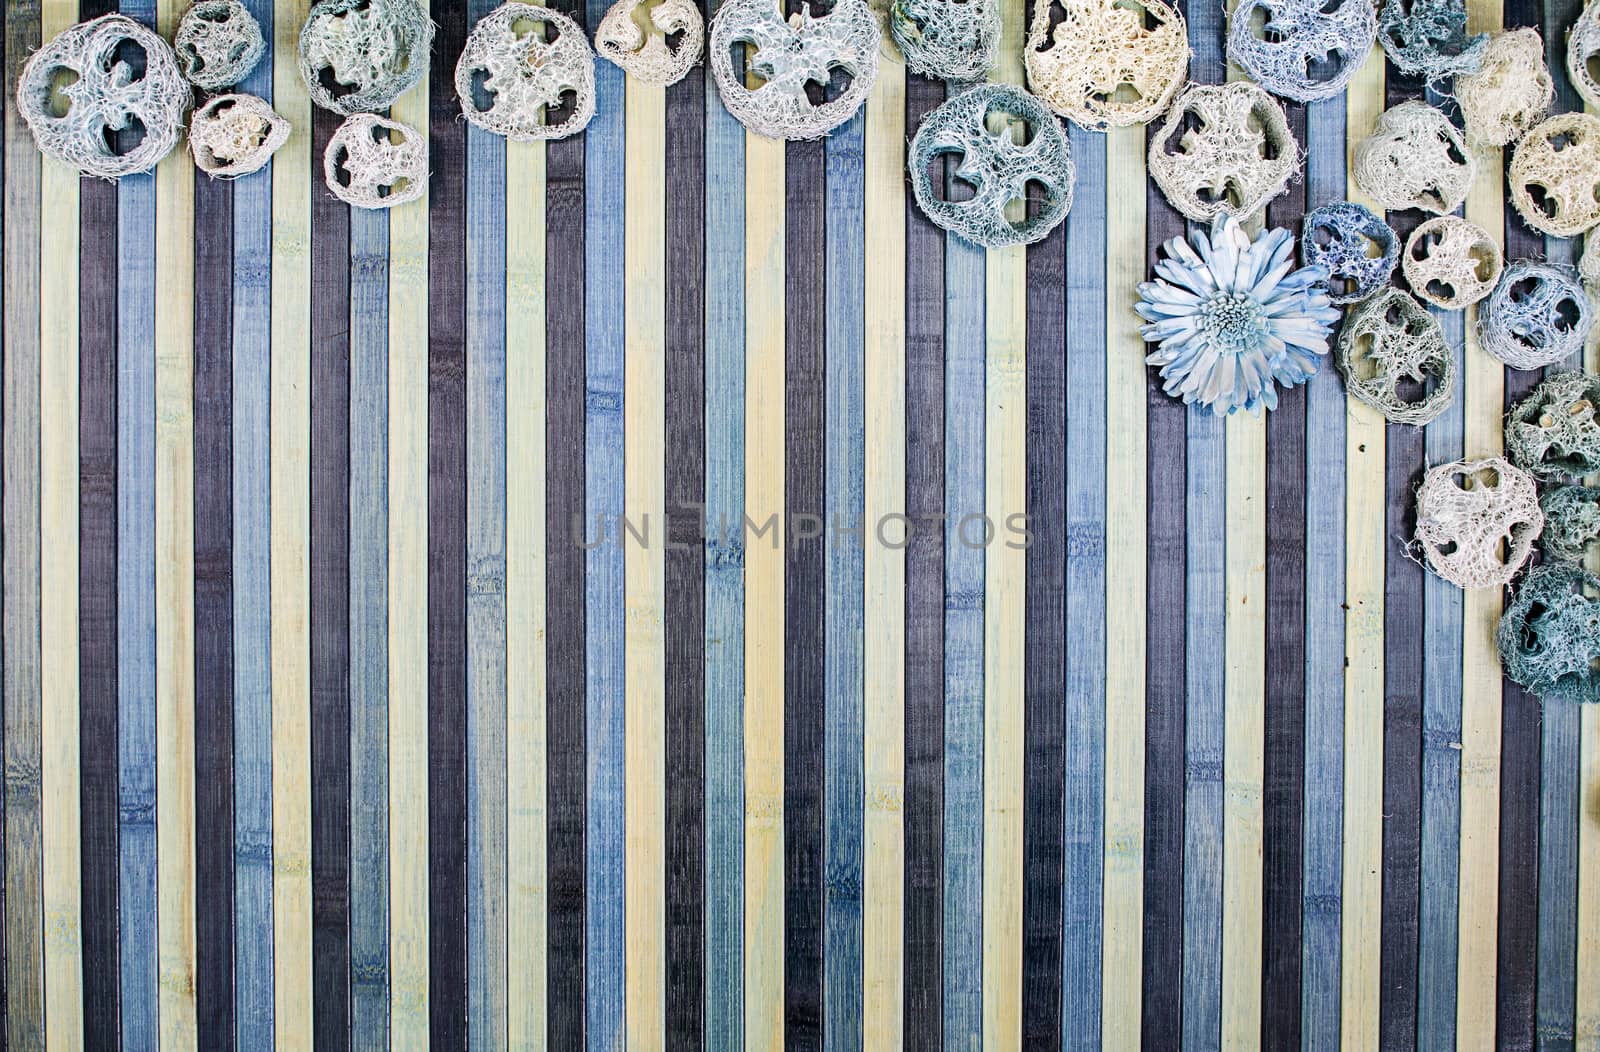 Background composition on wood in shades of light blue and blue with a matching potpourri contour